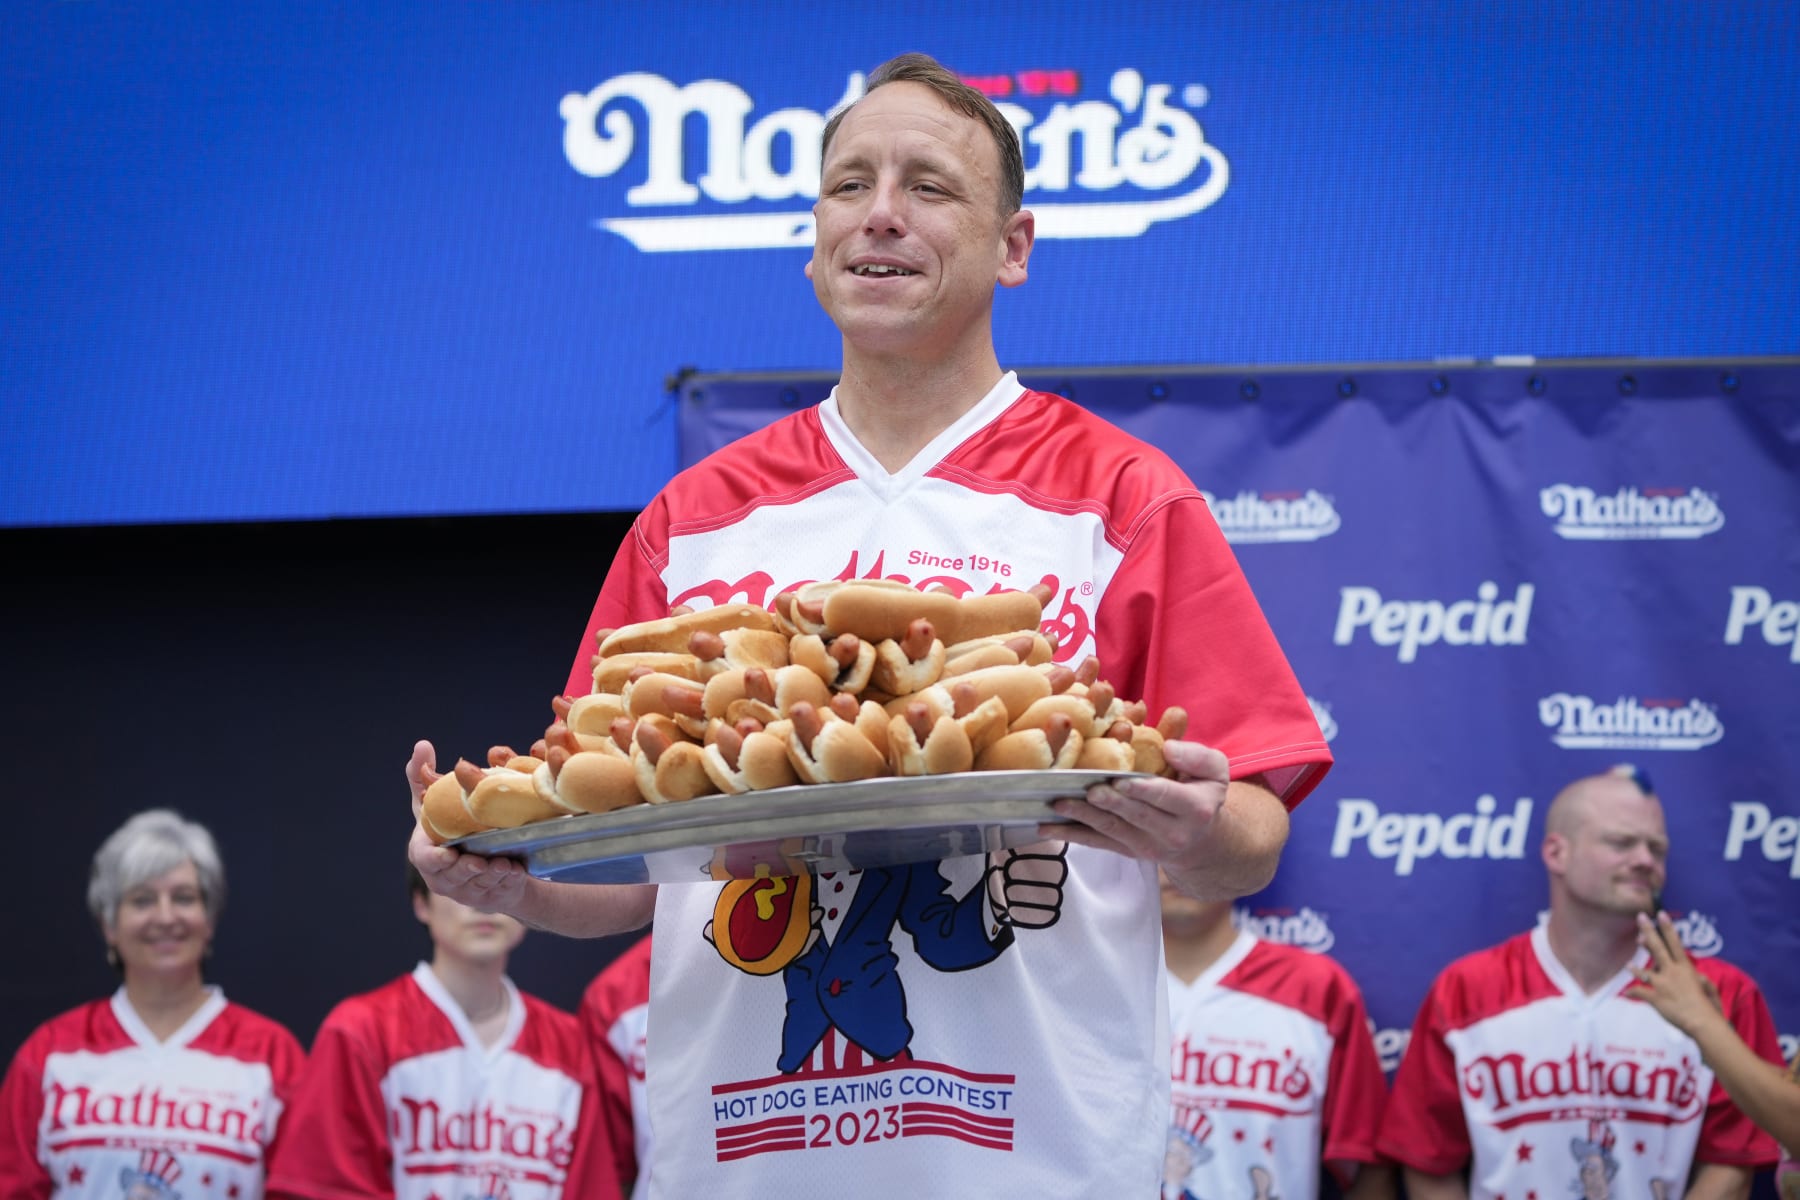 2023 Hot Dog Eating Contest Tshirts – Nathan's Famous